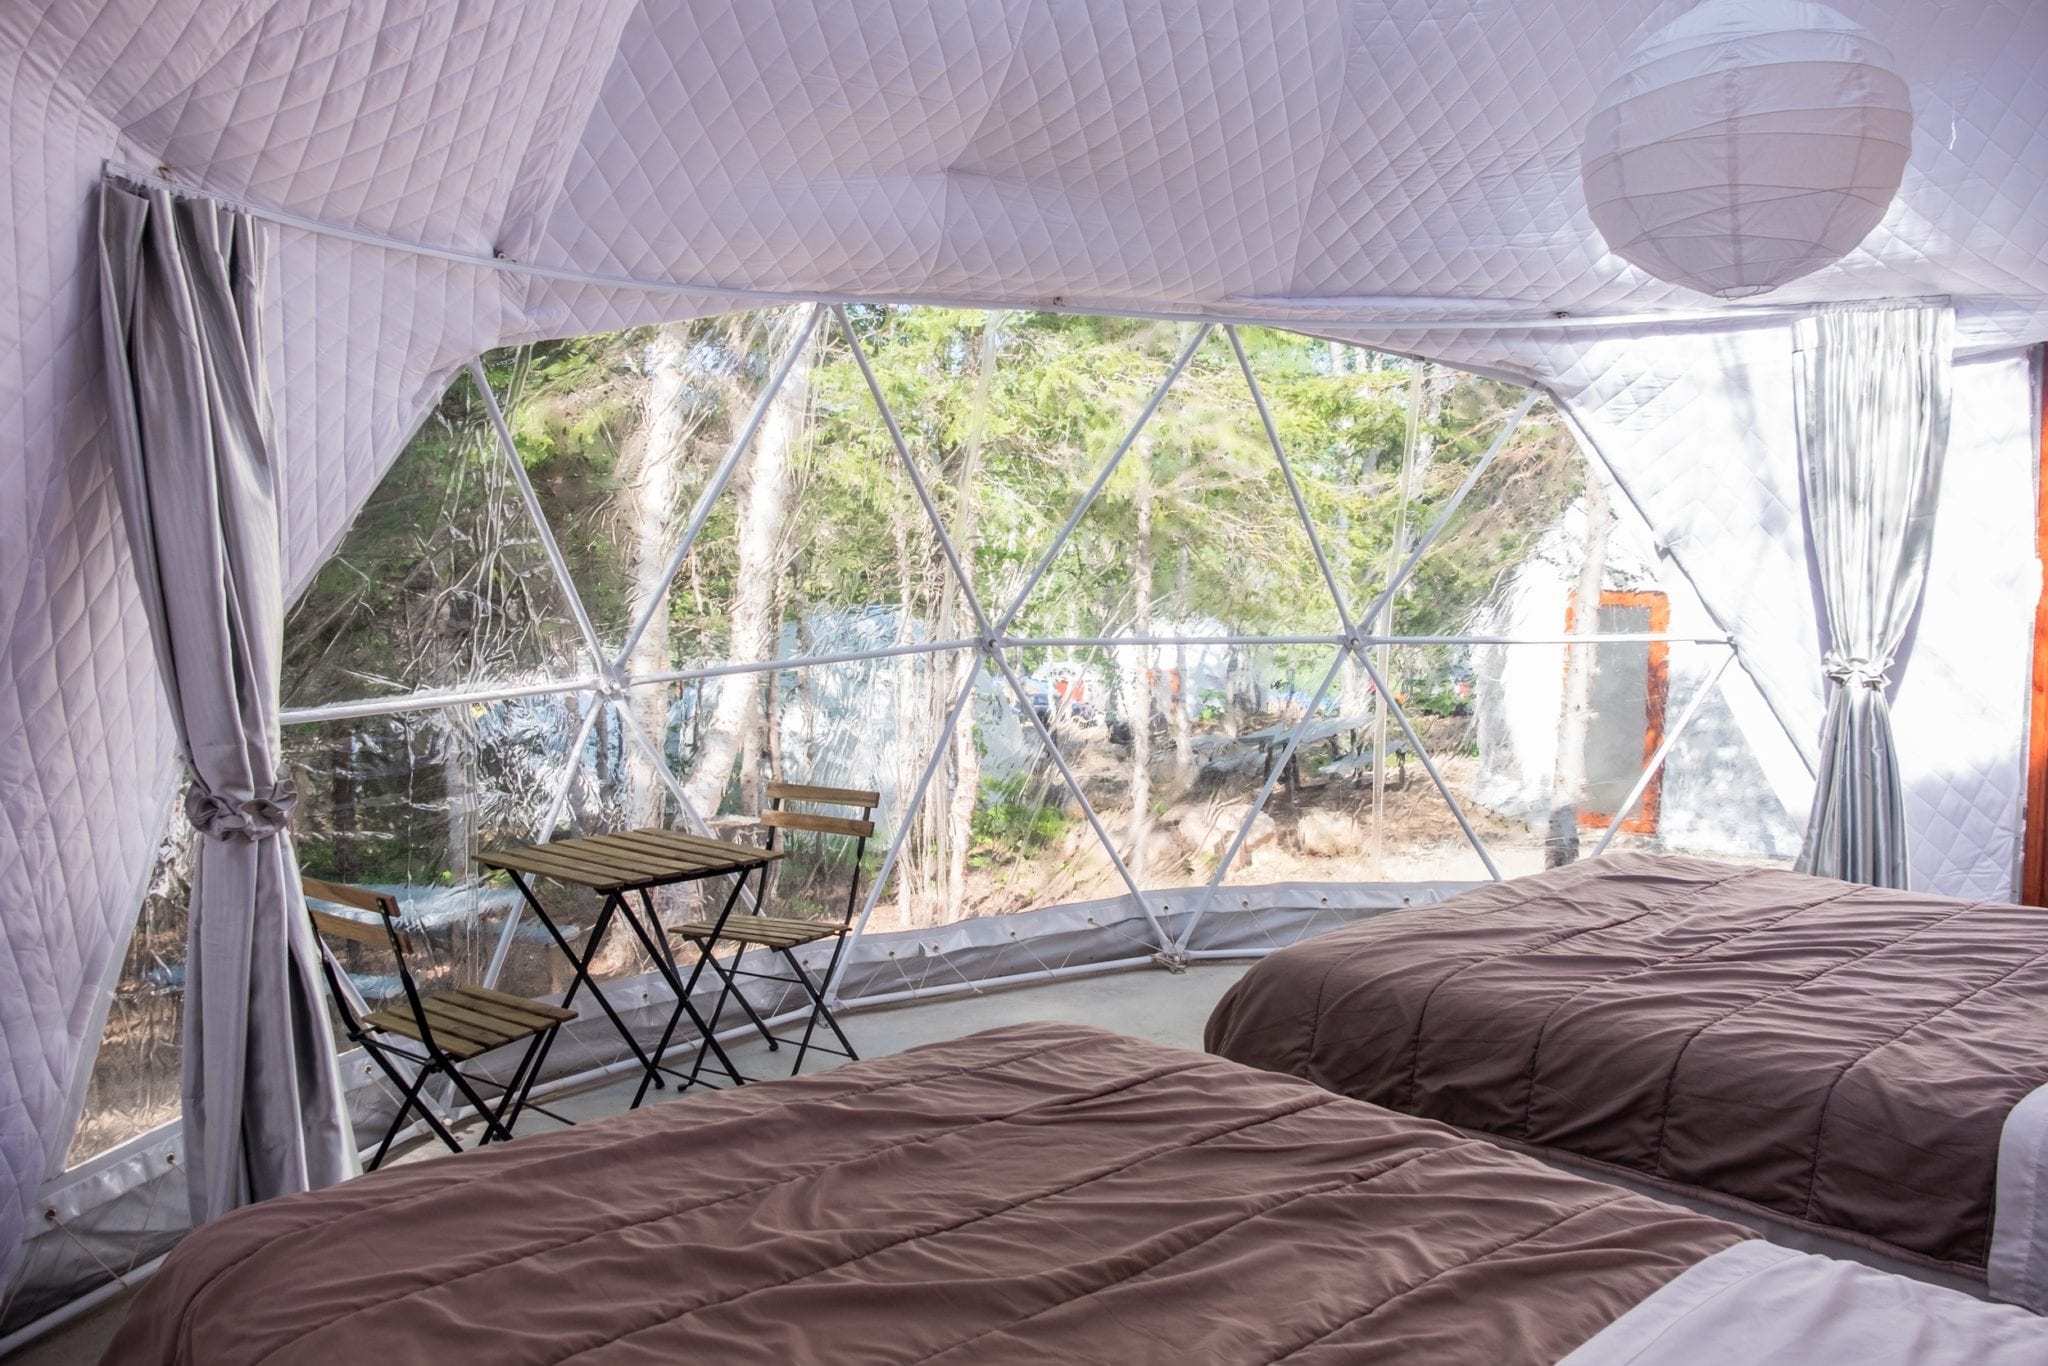 Two beds side by side in front of the triangular windows of the Blue Bayou Geodesic Domes